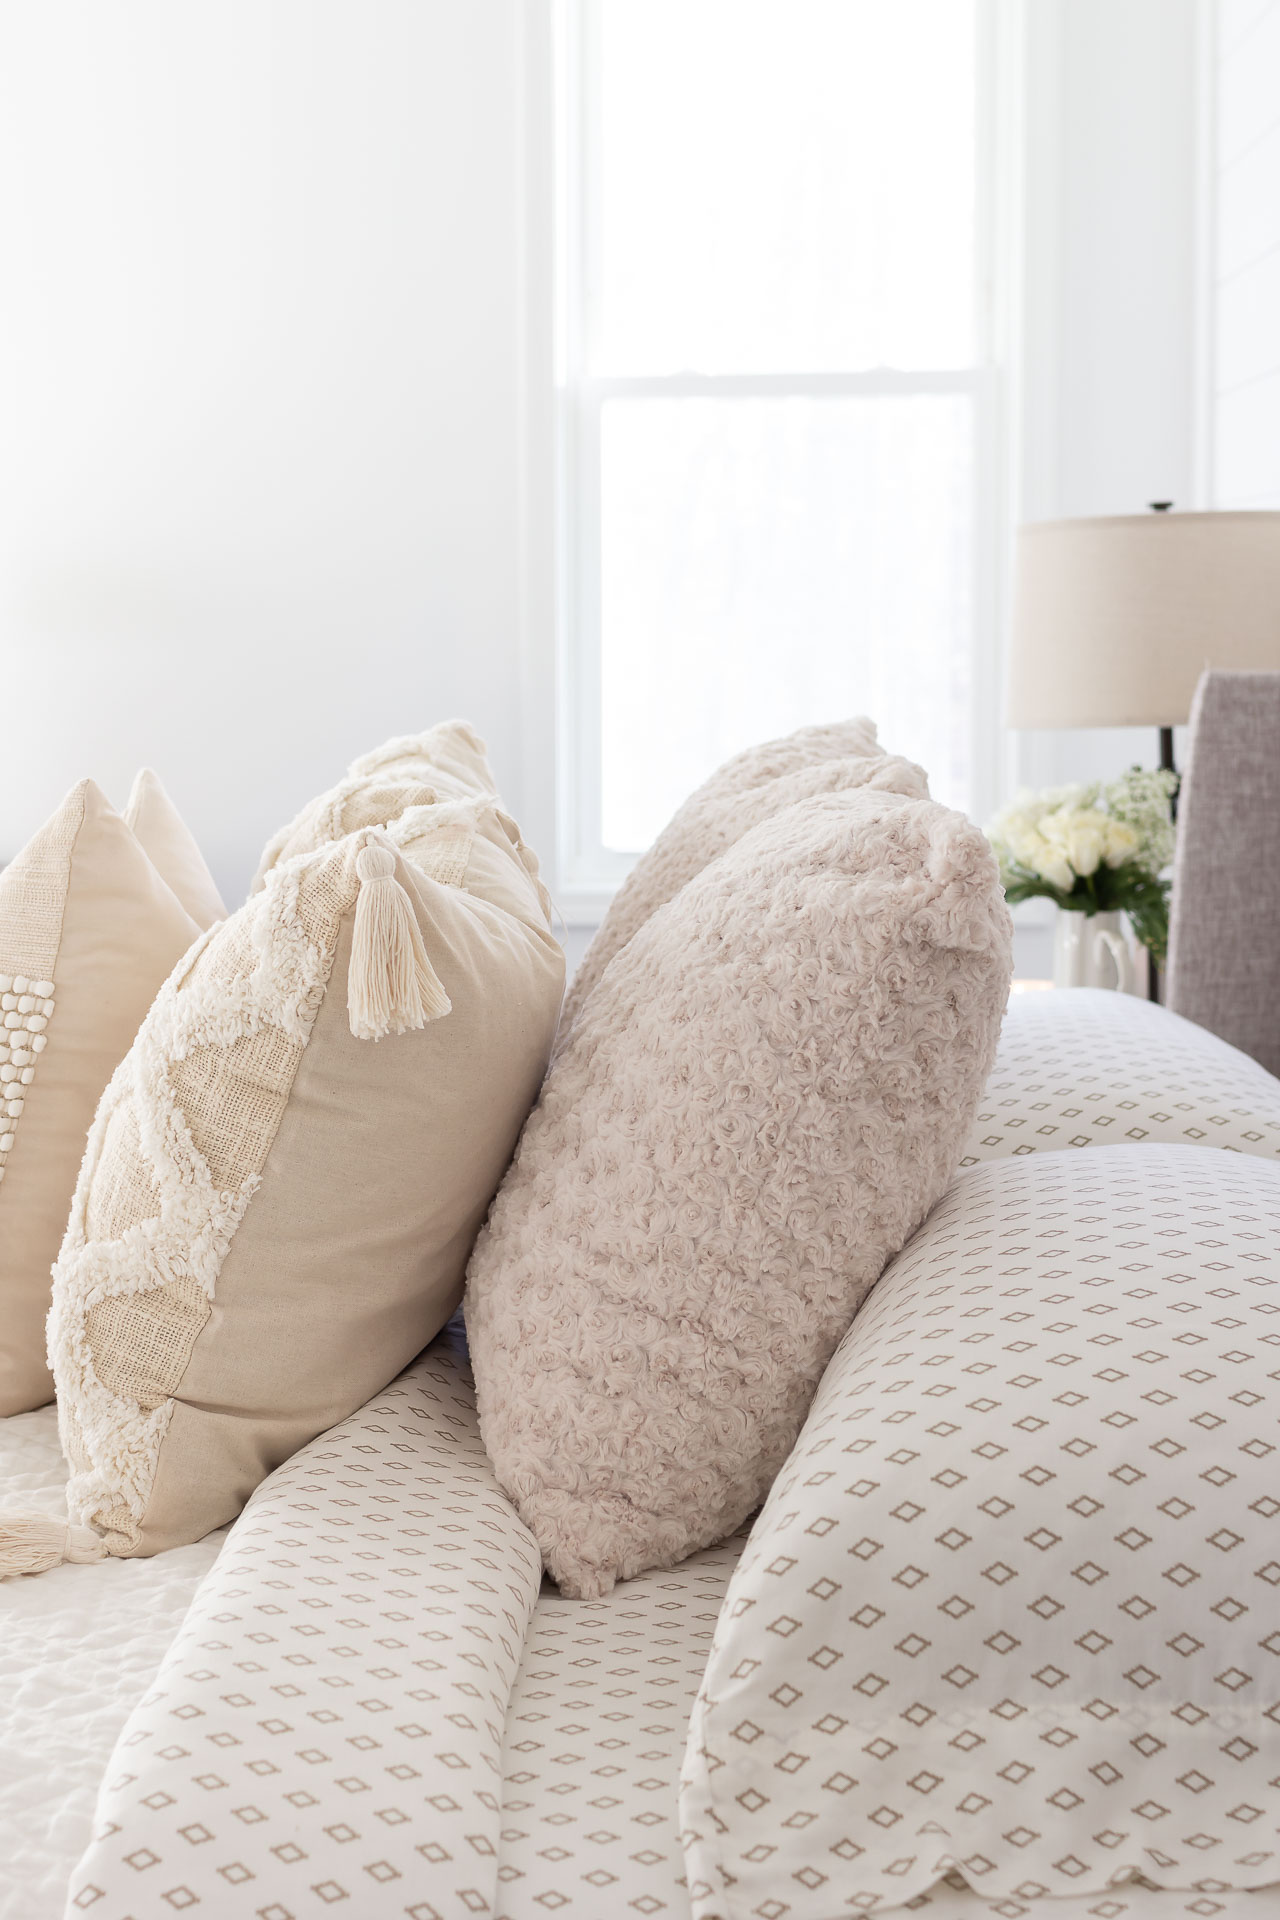 https://www.onsuttonplace.com/wp-content/uploads/2021/12/neutral-pillows-stacked-on-bed.jpg